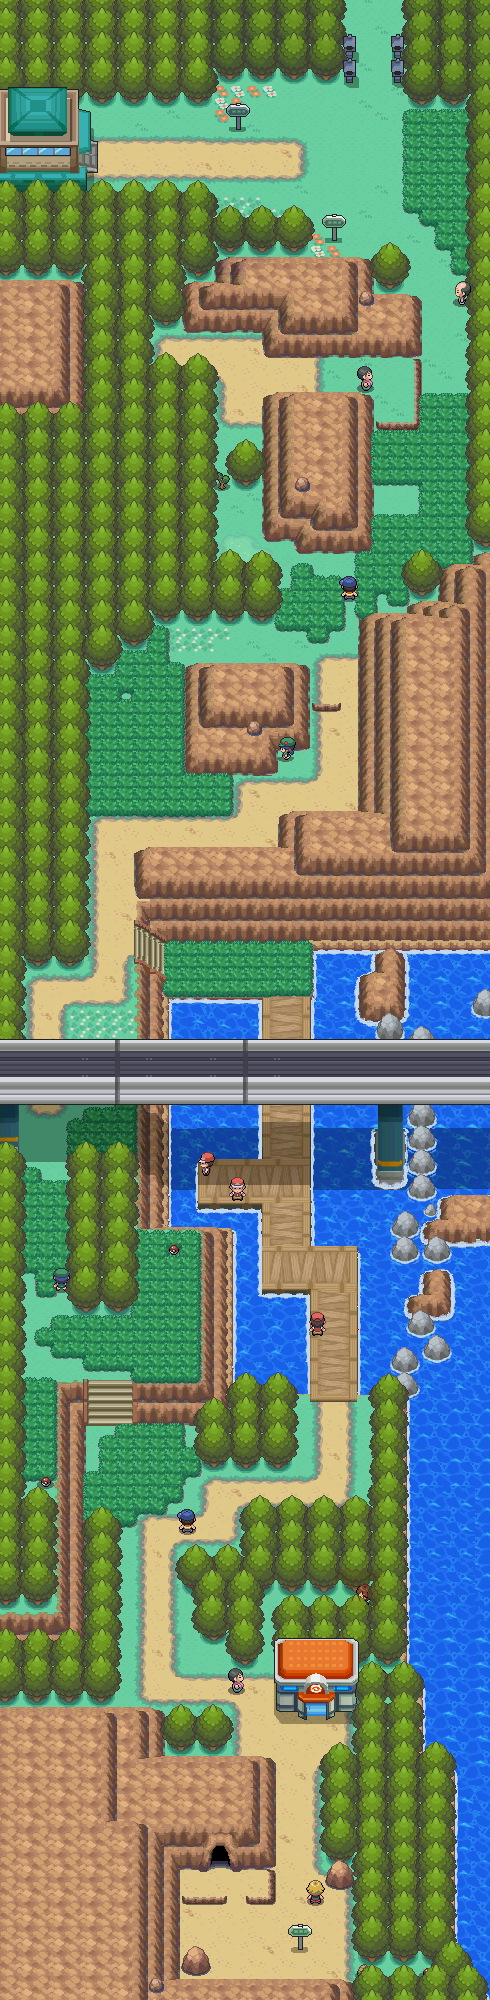 Pokémon Gold and Silver/Victory Road — StrategyWiki